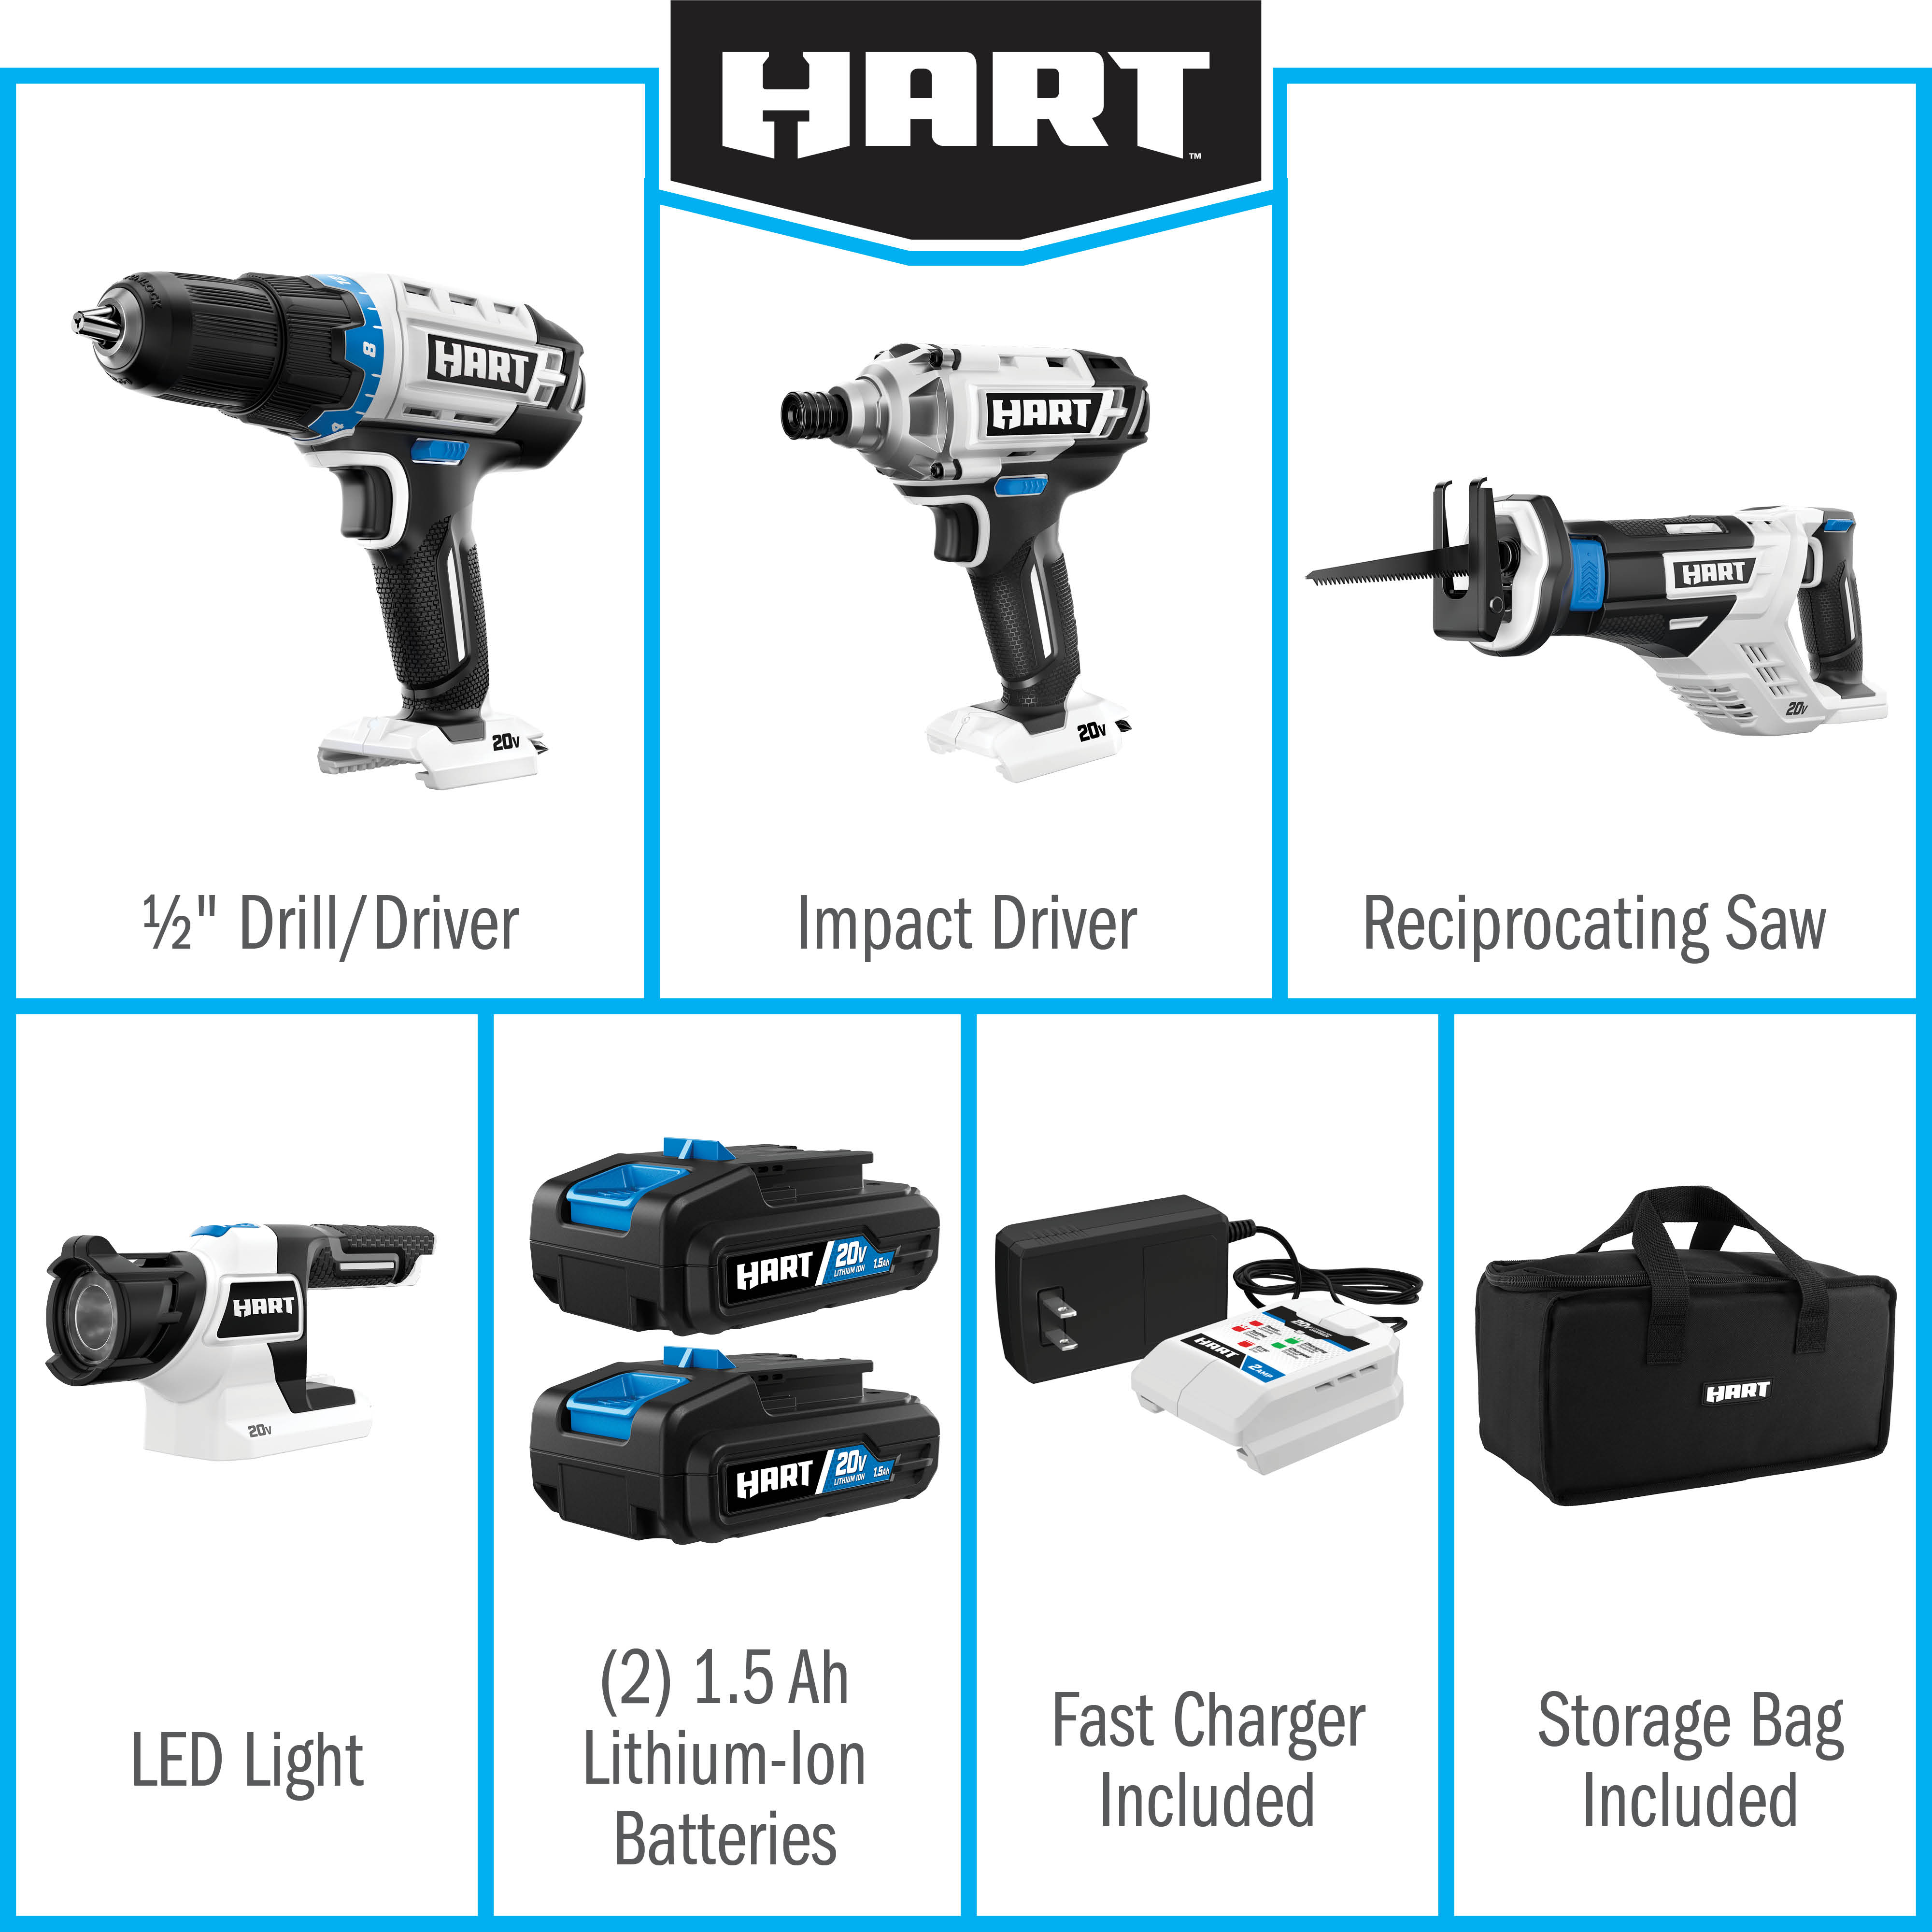 HART 20-Volt 4-Tool Battery-Powered Combo Kit, (2) 1.5Ah Lithium-Ion Batteries - image 13 of 23